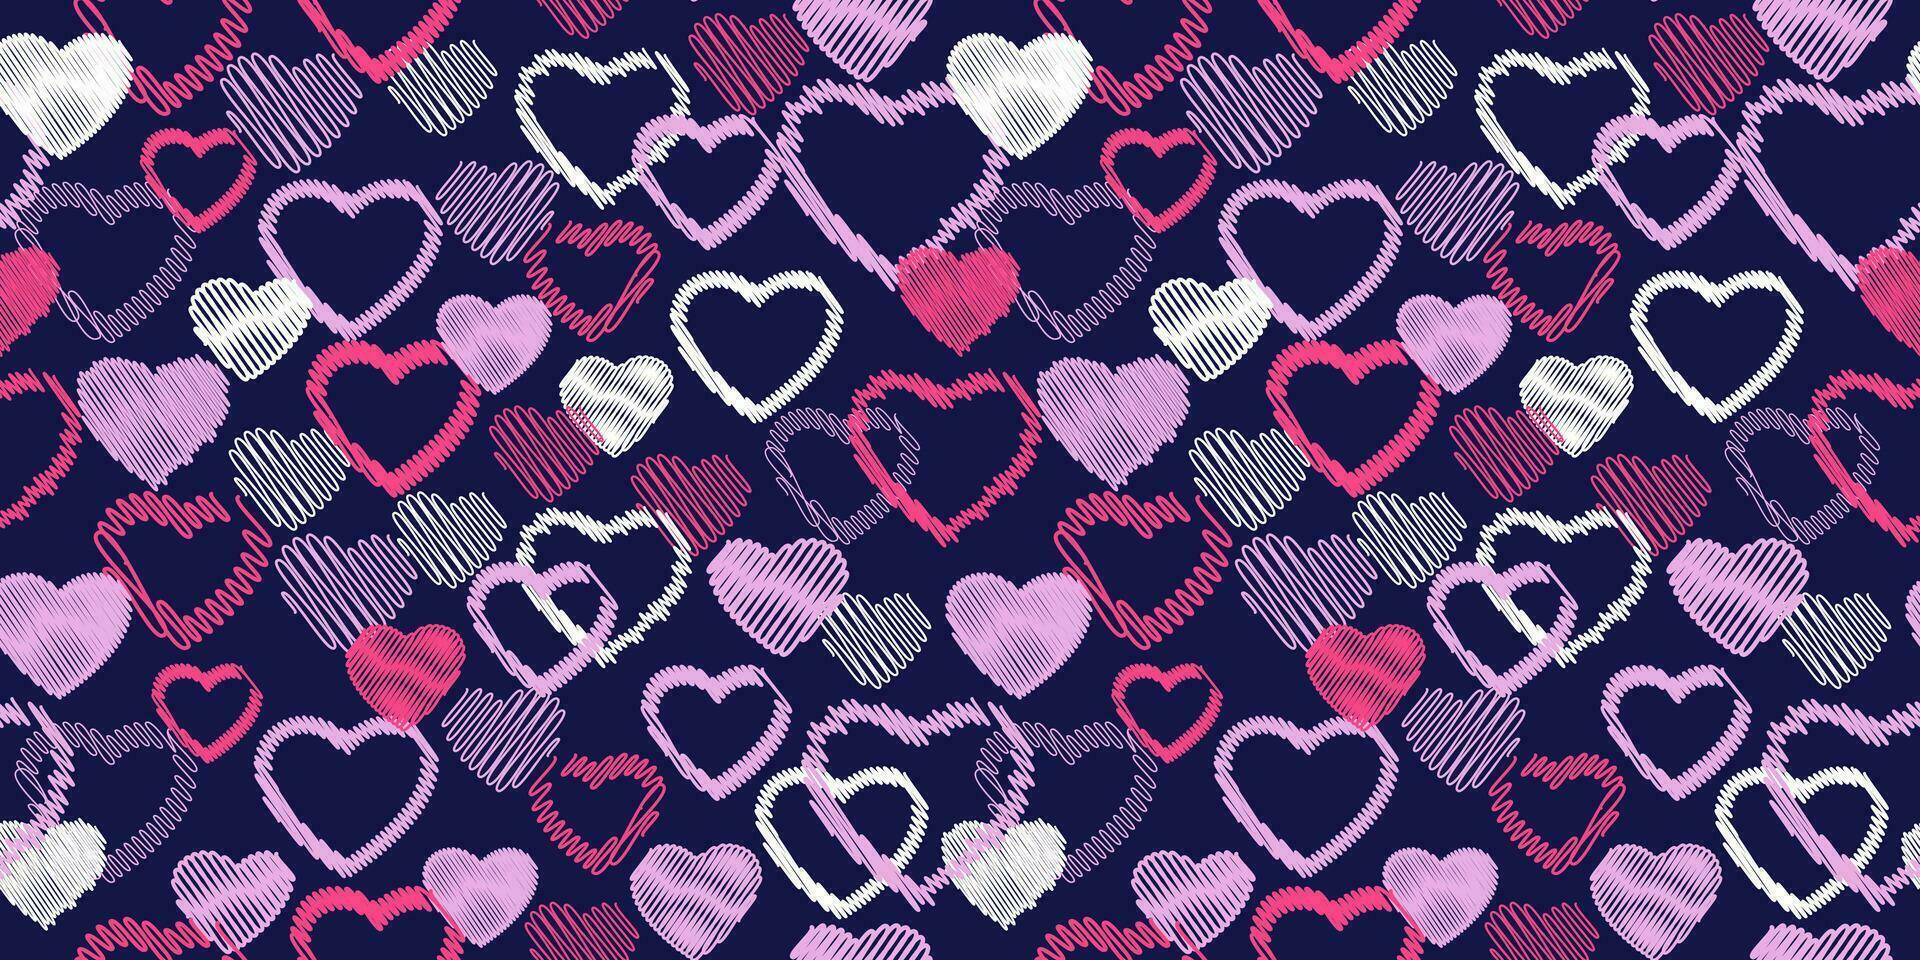 Seamless colorful pattern with vector hand drawn sketch shape hearts. Print with set texture pink heart silhouettes. Valentine, love dark background. Design for textile, fashion, fabric